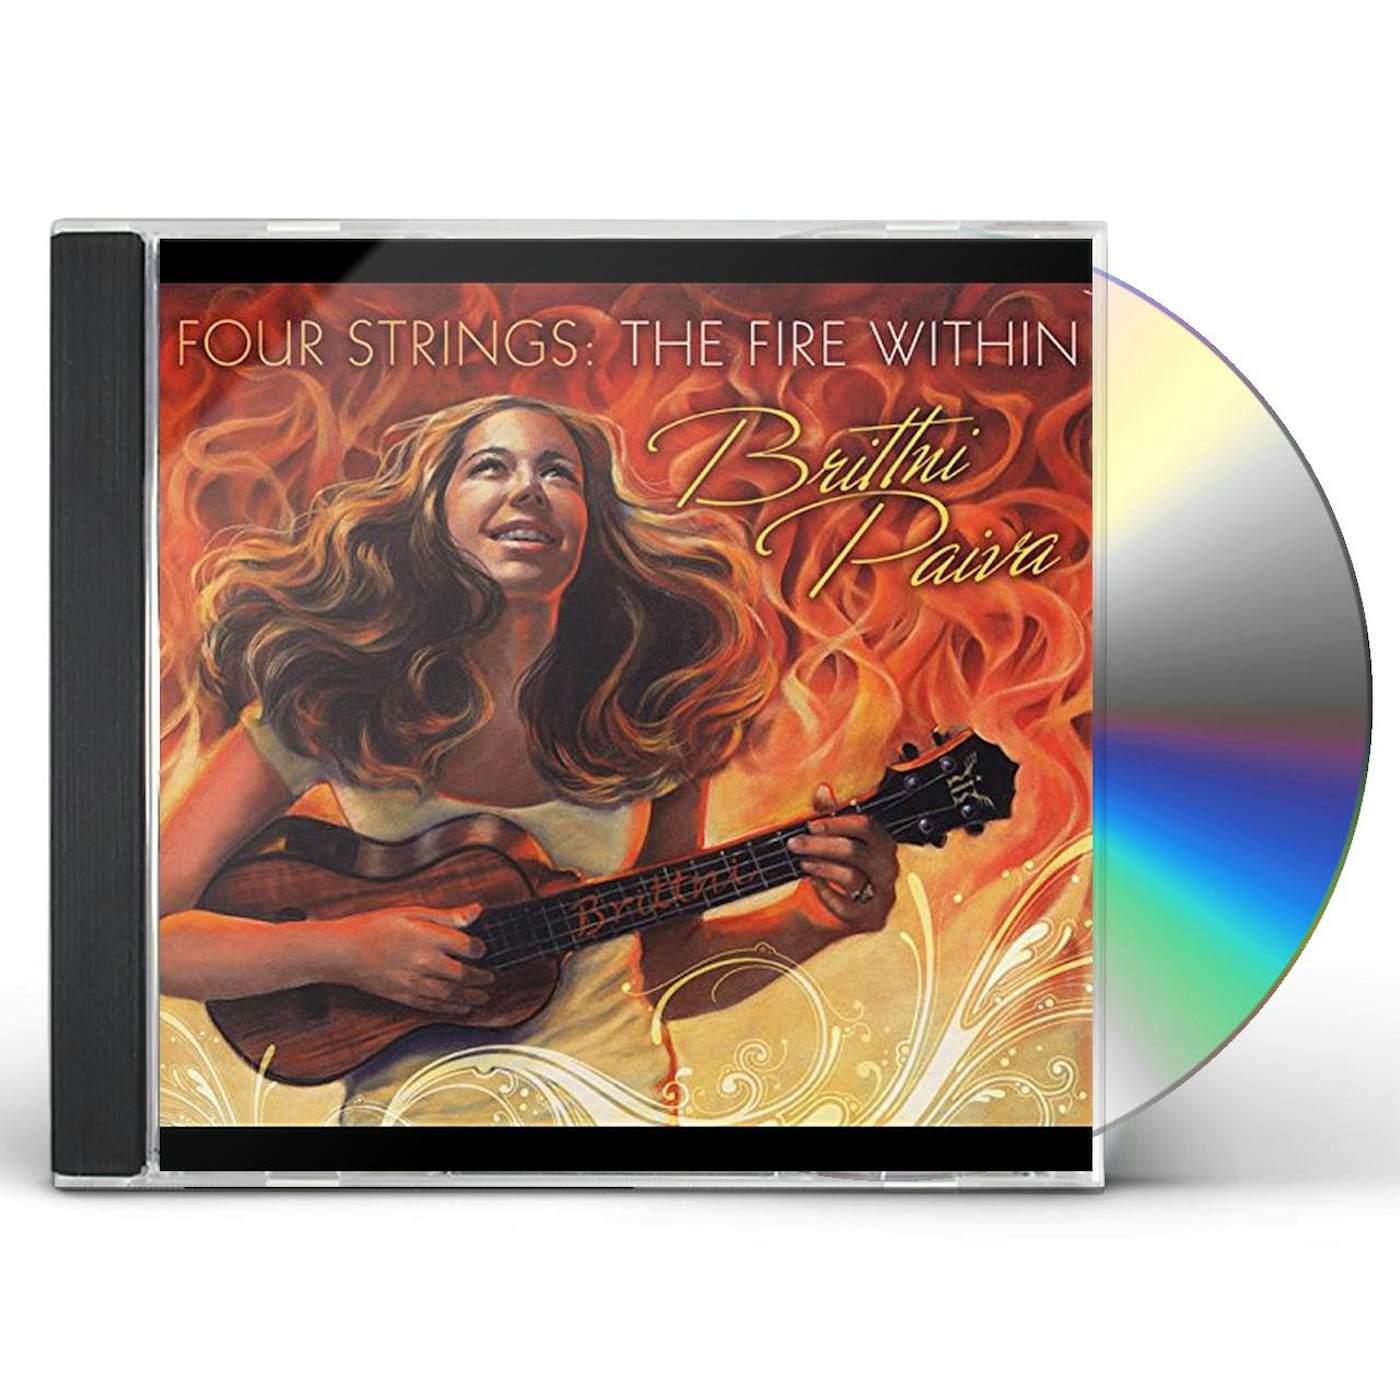 Brittni Paiva FOUR STRINGS: THE FIRE WITHIN CD